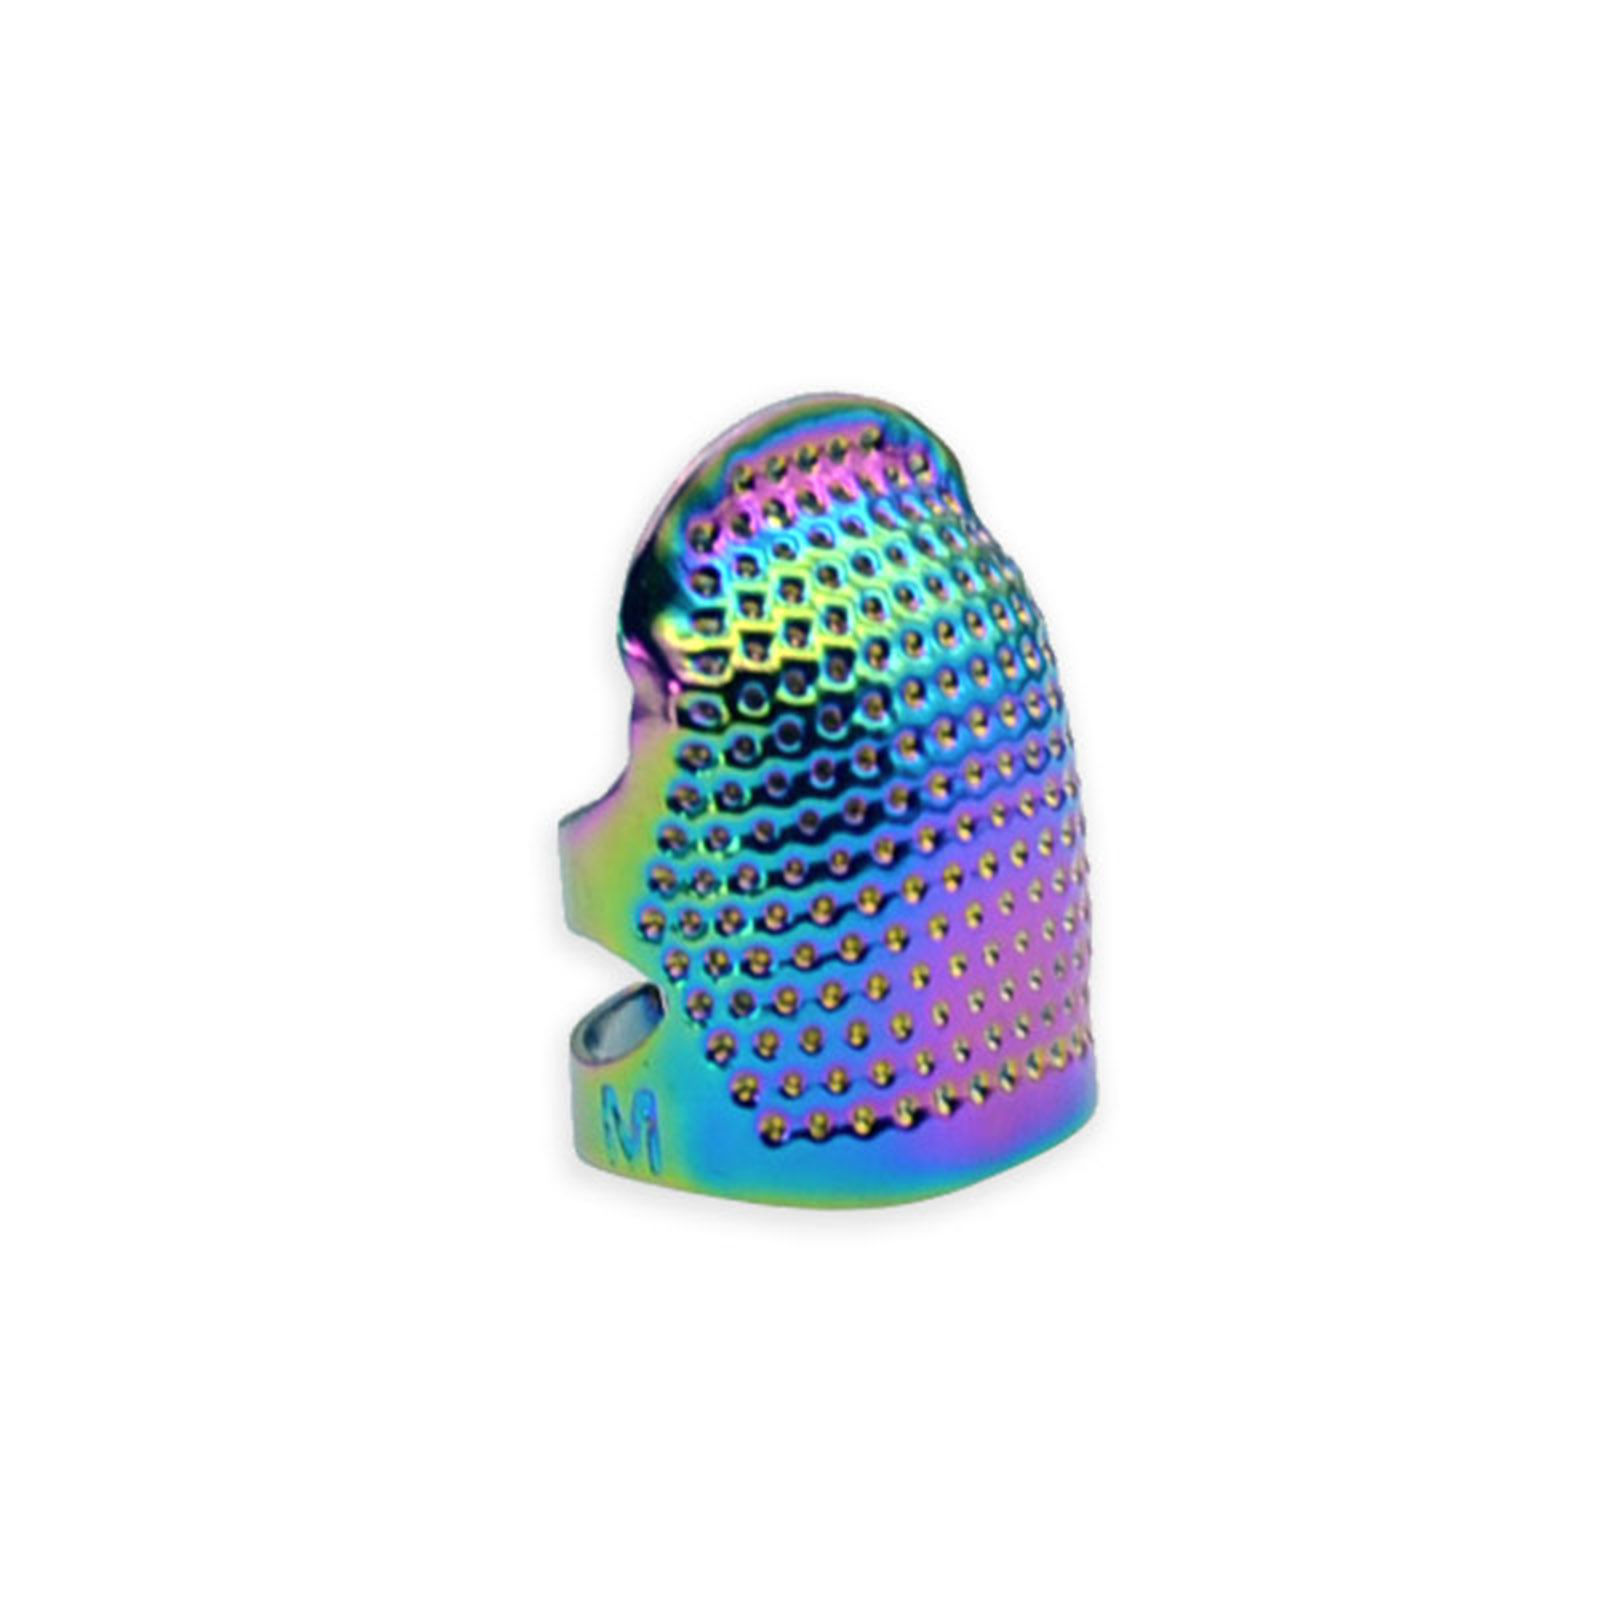 Picture of Brass Finger Thimble Protector Sewing Tools Rainbow Color Plated 2.6cm x 1.8cm, 2 PCs